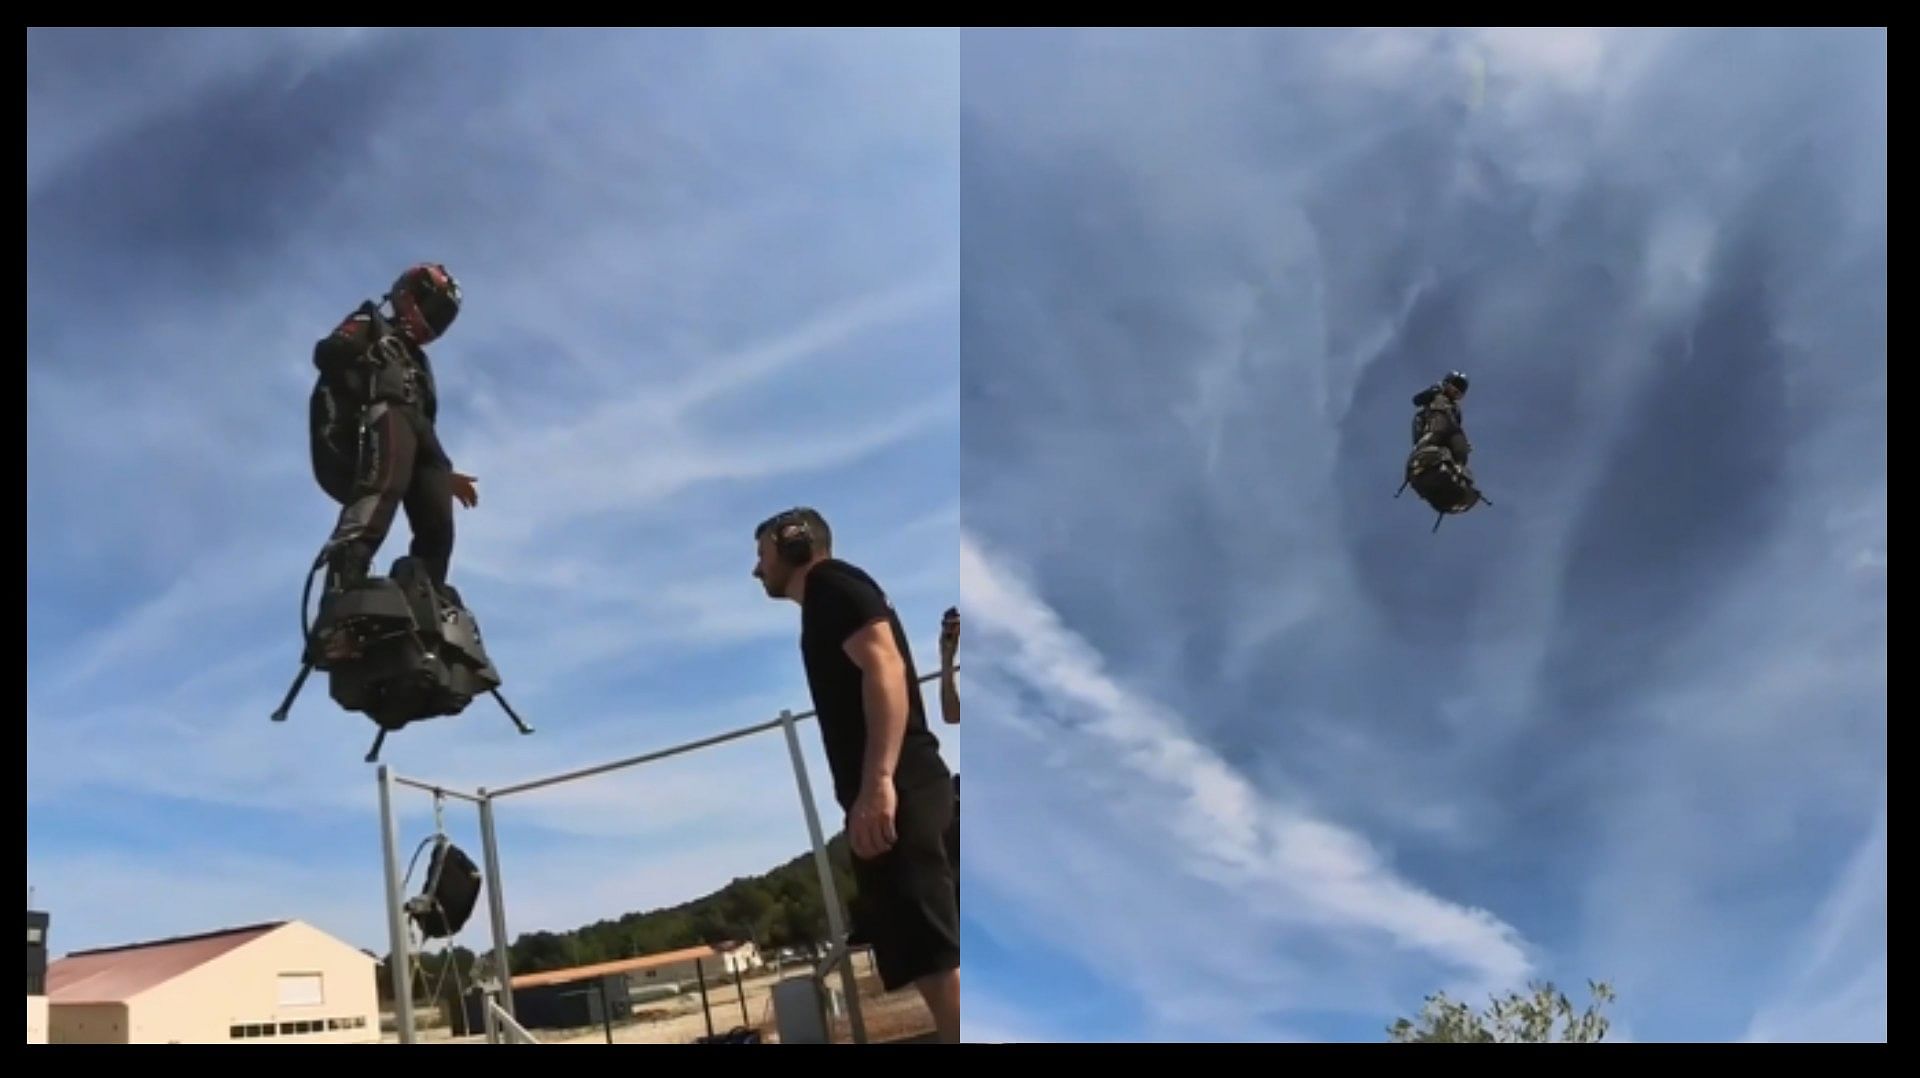 A person was seen flying like a bird new technology gadget of fly board viral video